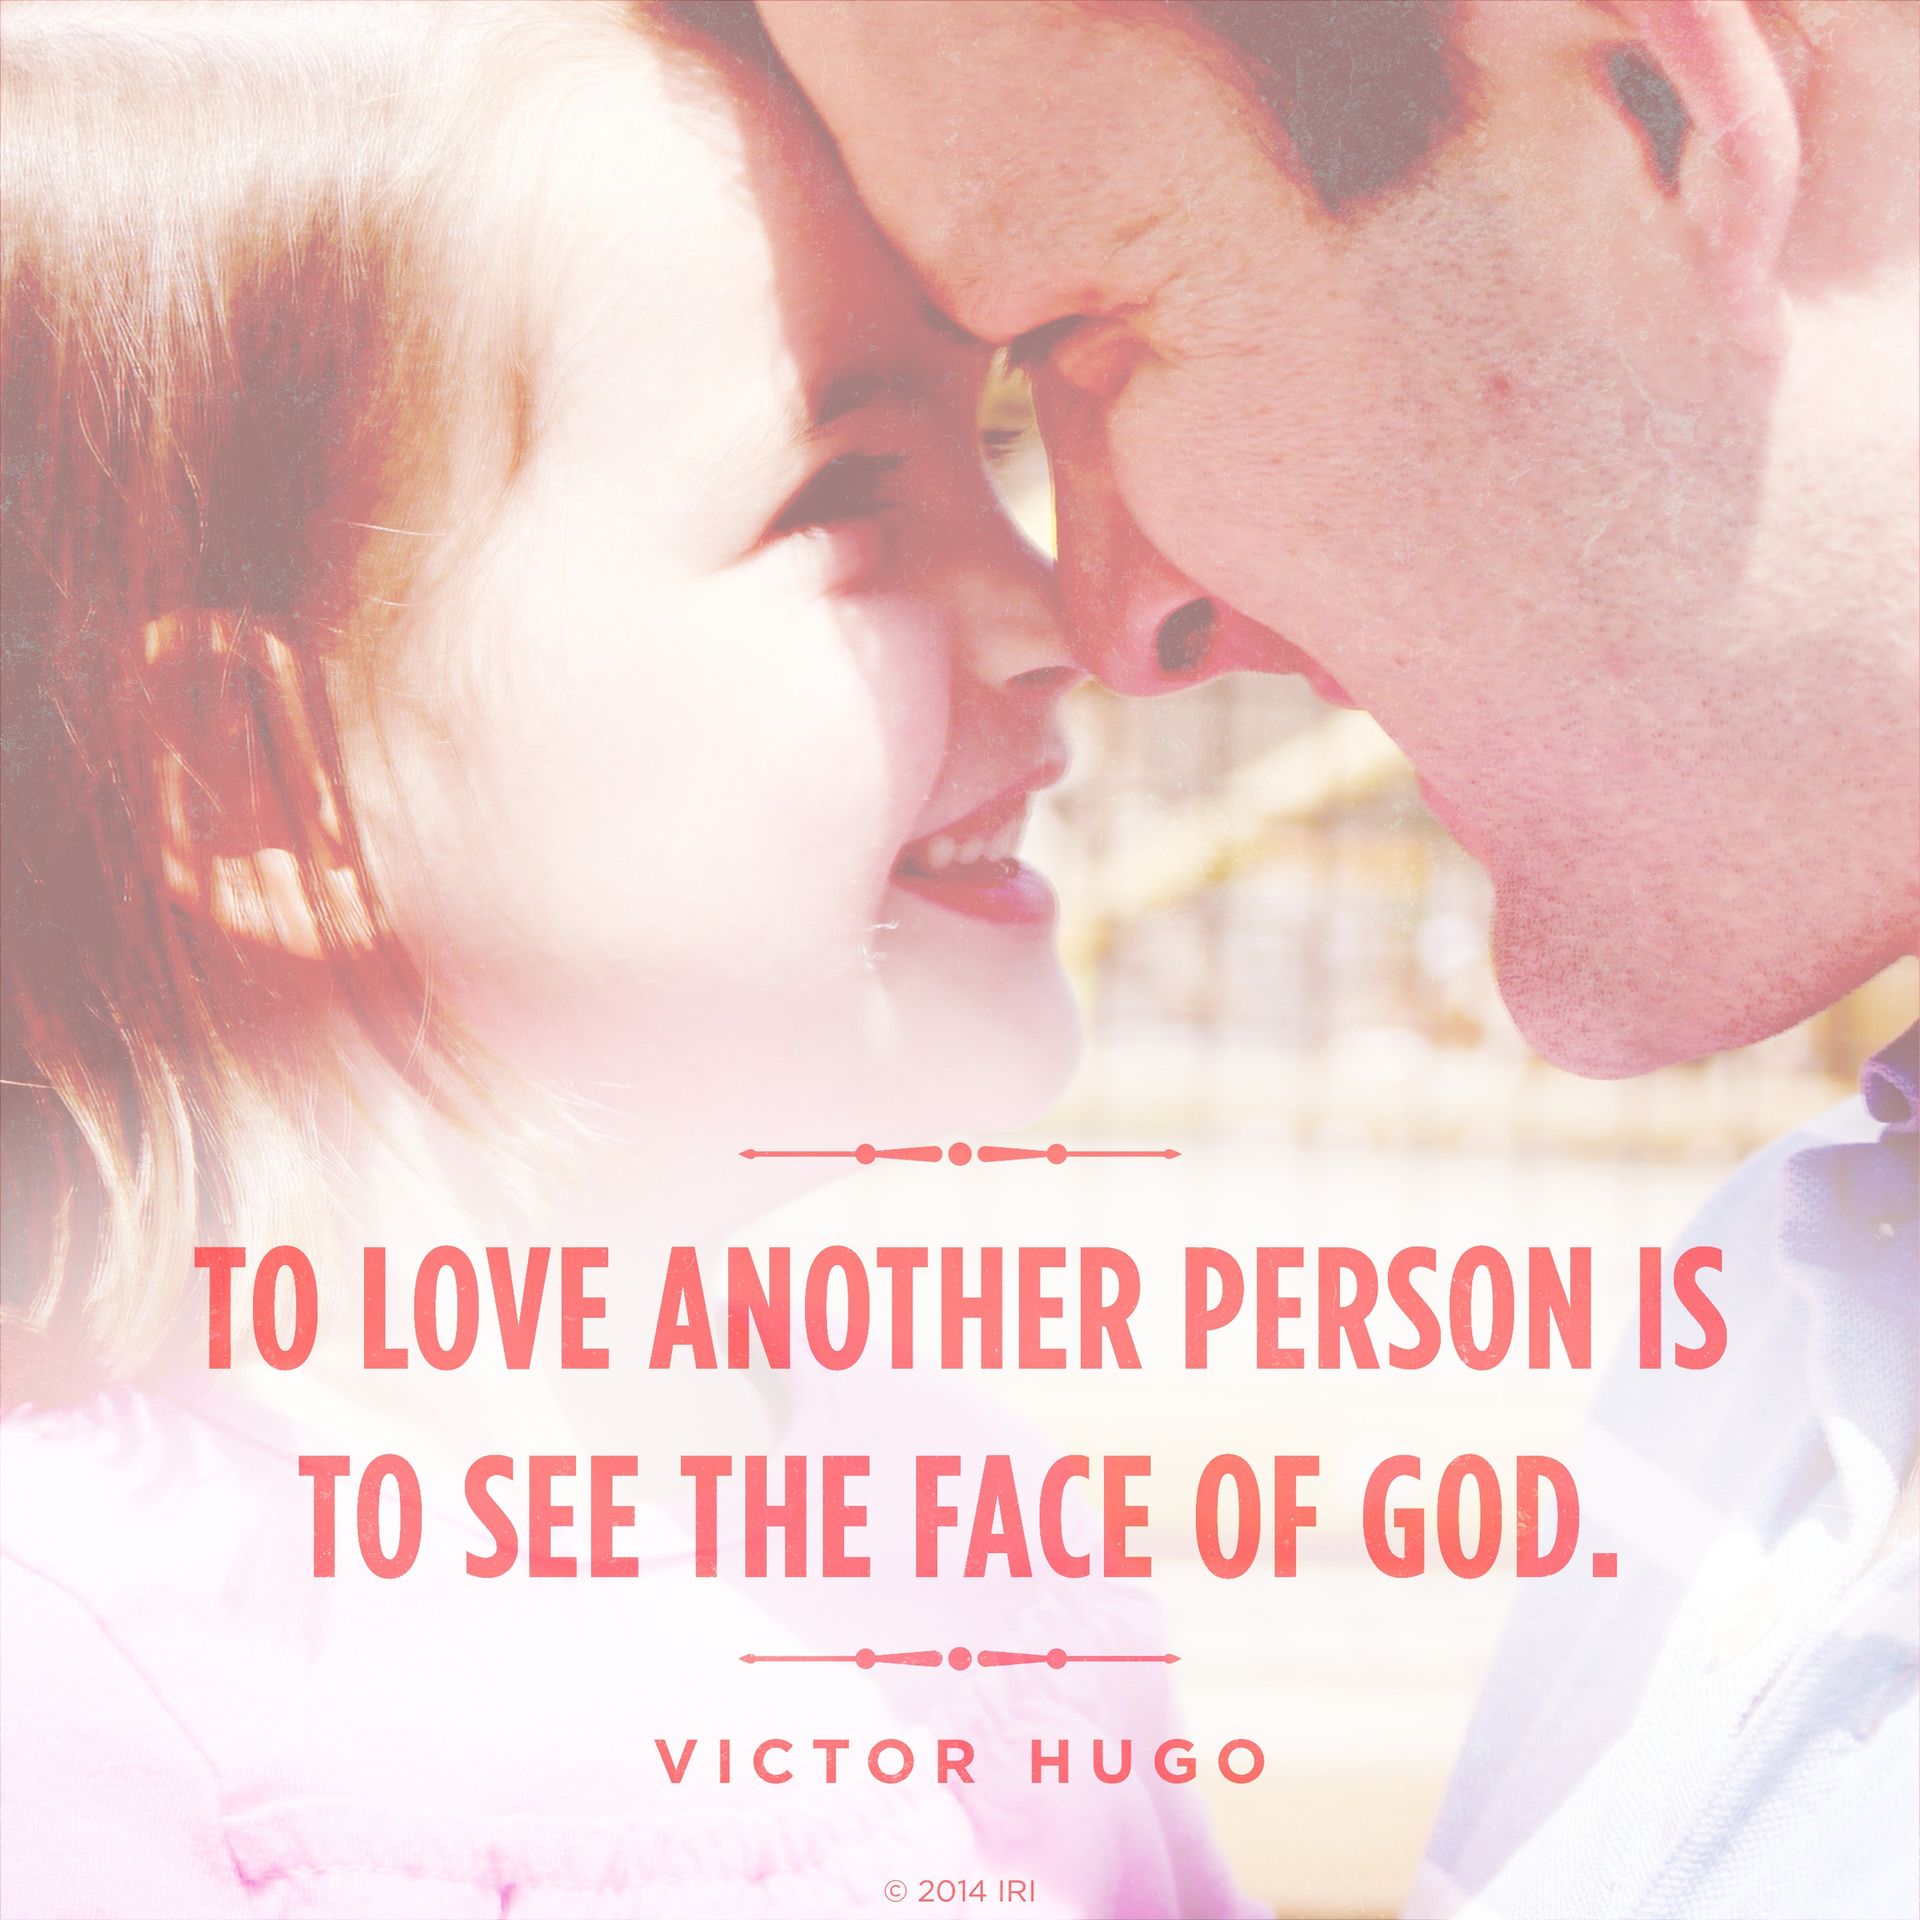 “To love another person is to see the face of God.”—Victor Hugo, Les Misérables